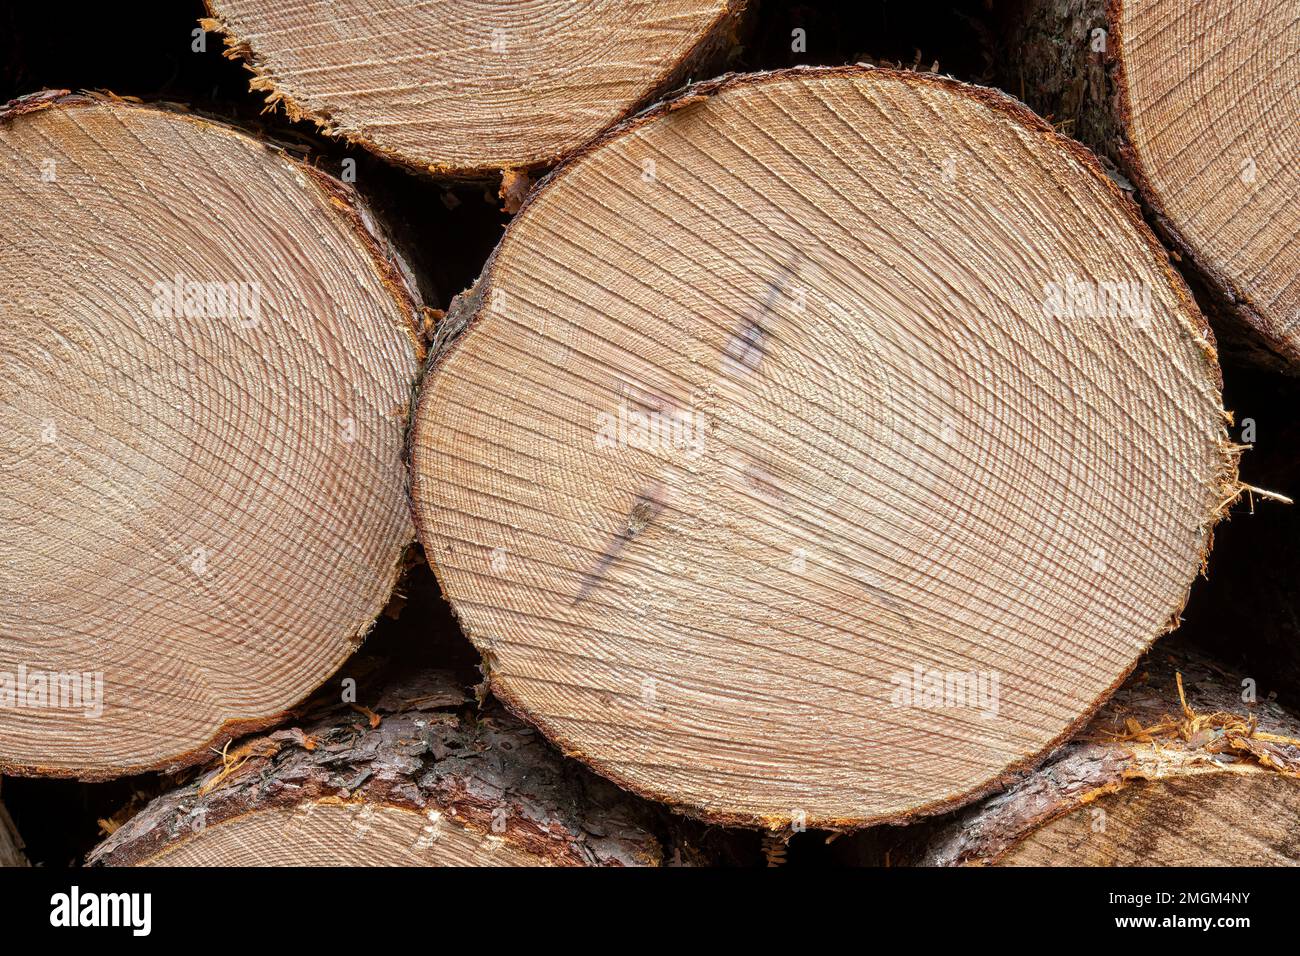 Differential growth, saw marks and past branches revealed in a cross-section of a harvested pine tree, Beacon Wood, Penrith, Cumbria, UK Stock Photo